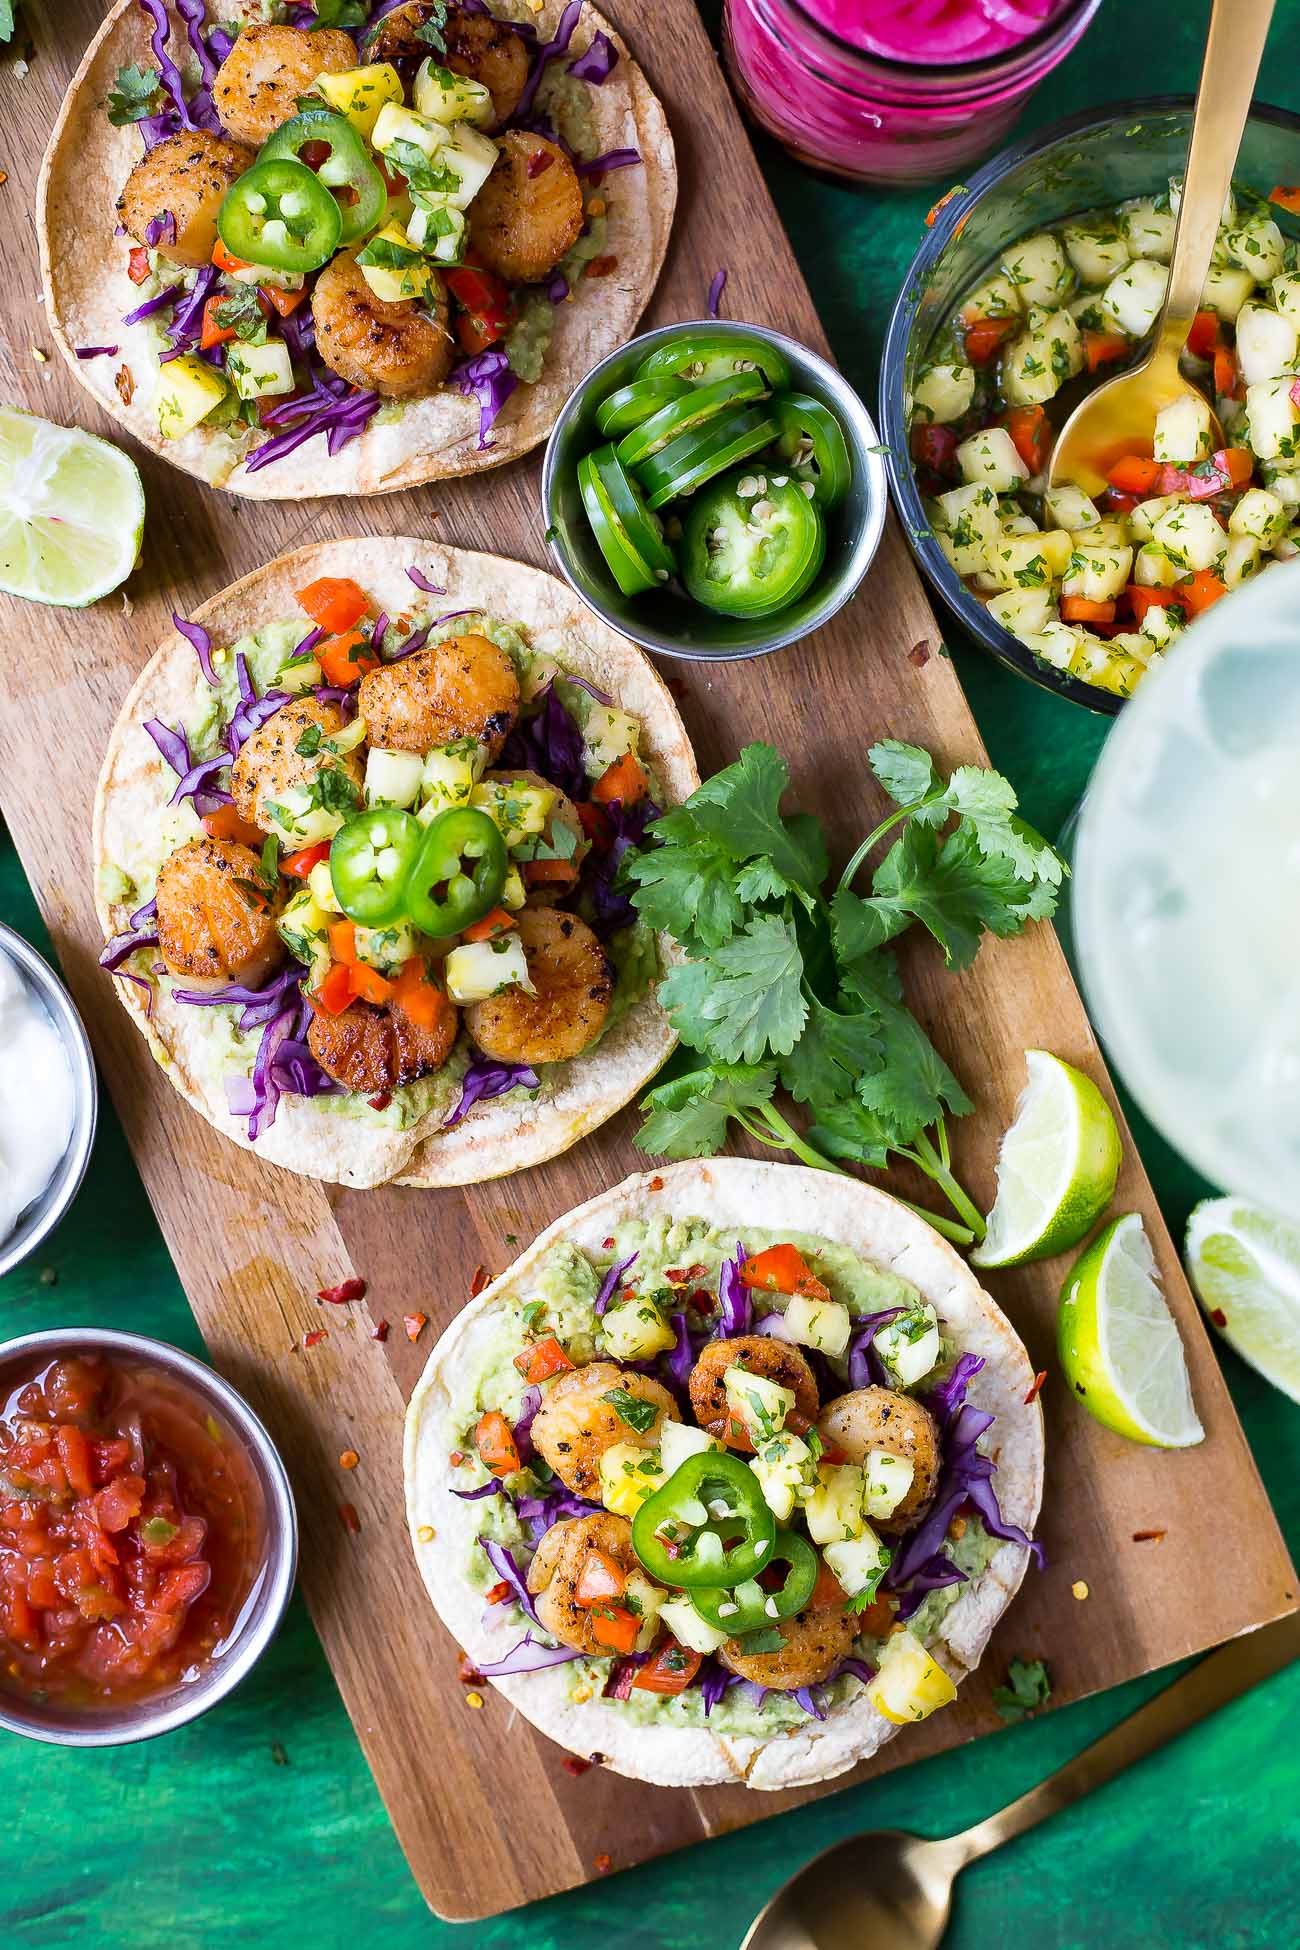 Sexi Xxx 3gp - Scallop Tacos with Pineapple Salsa - Egmont Seafoods